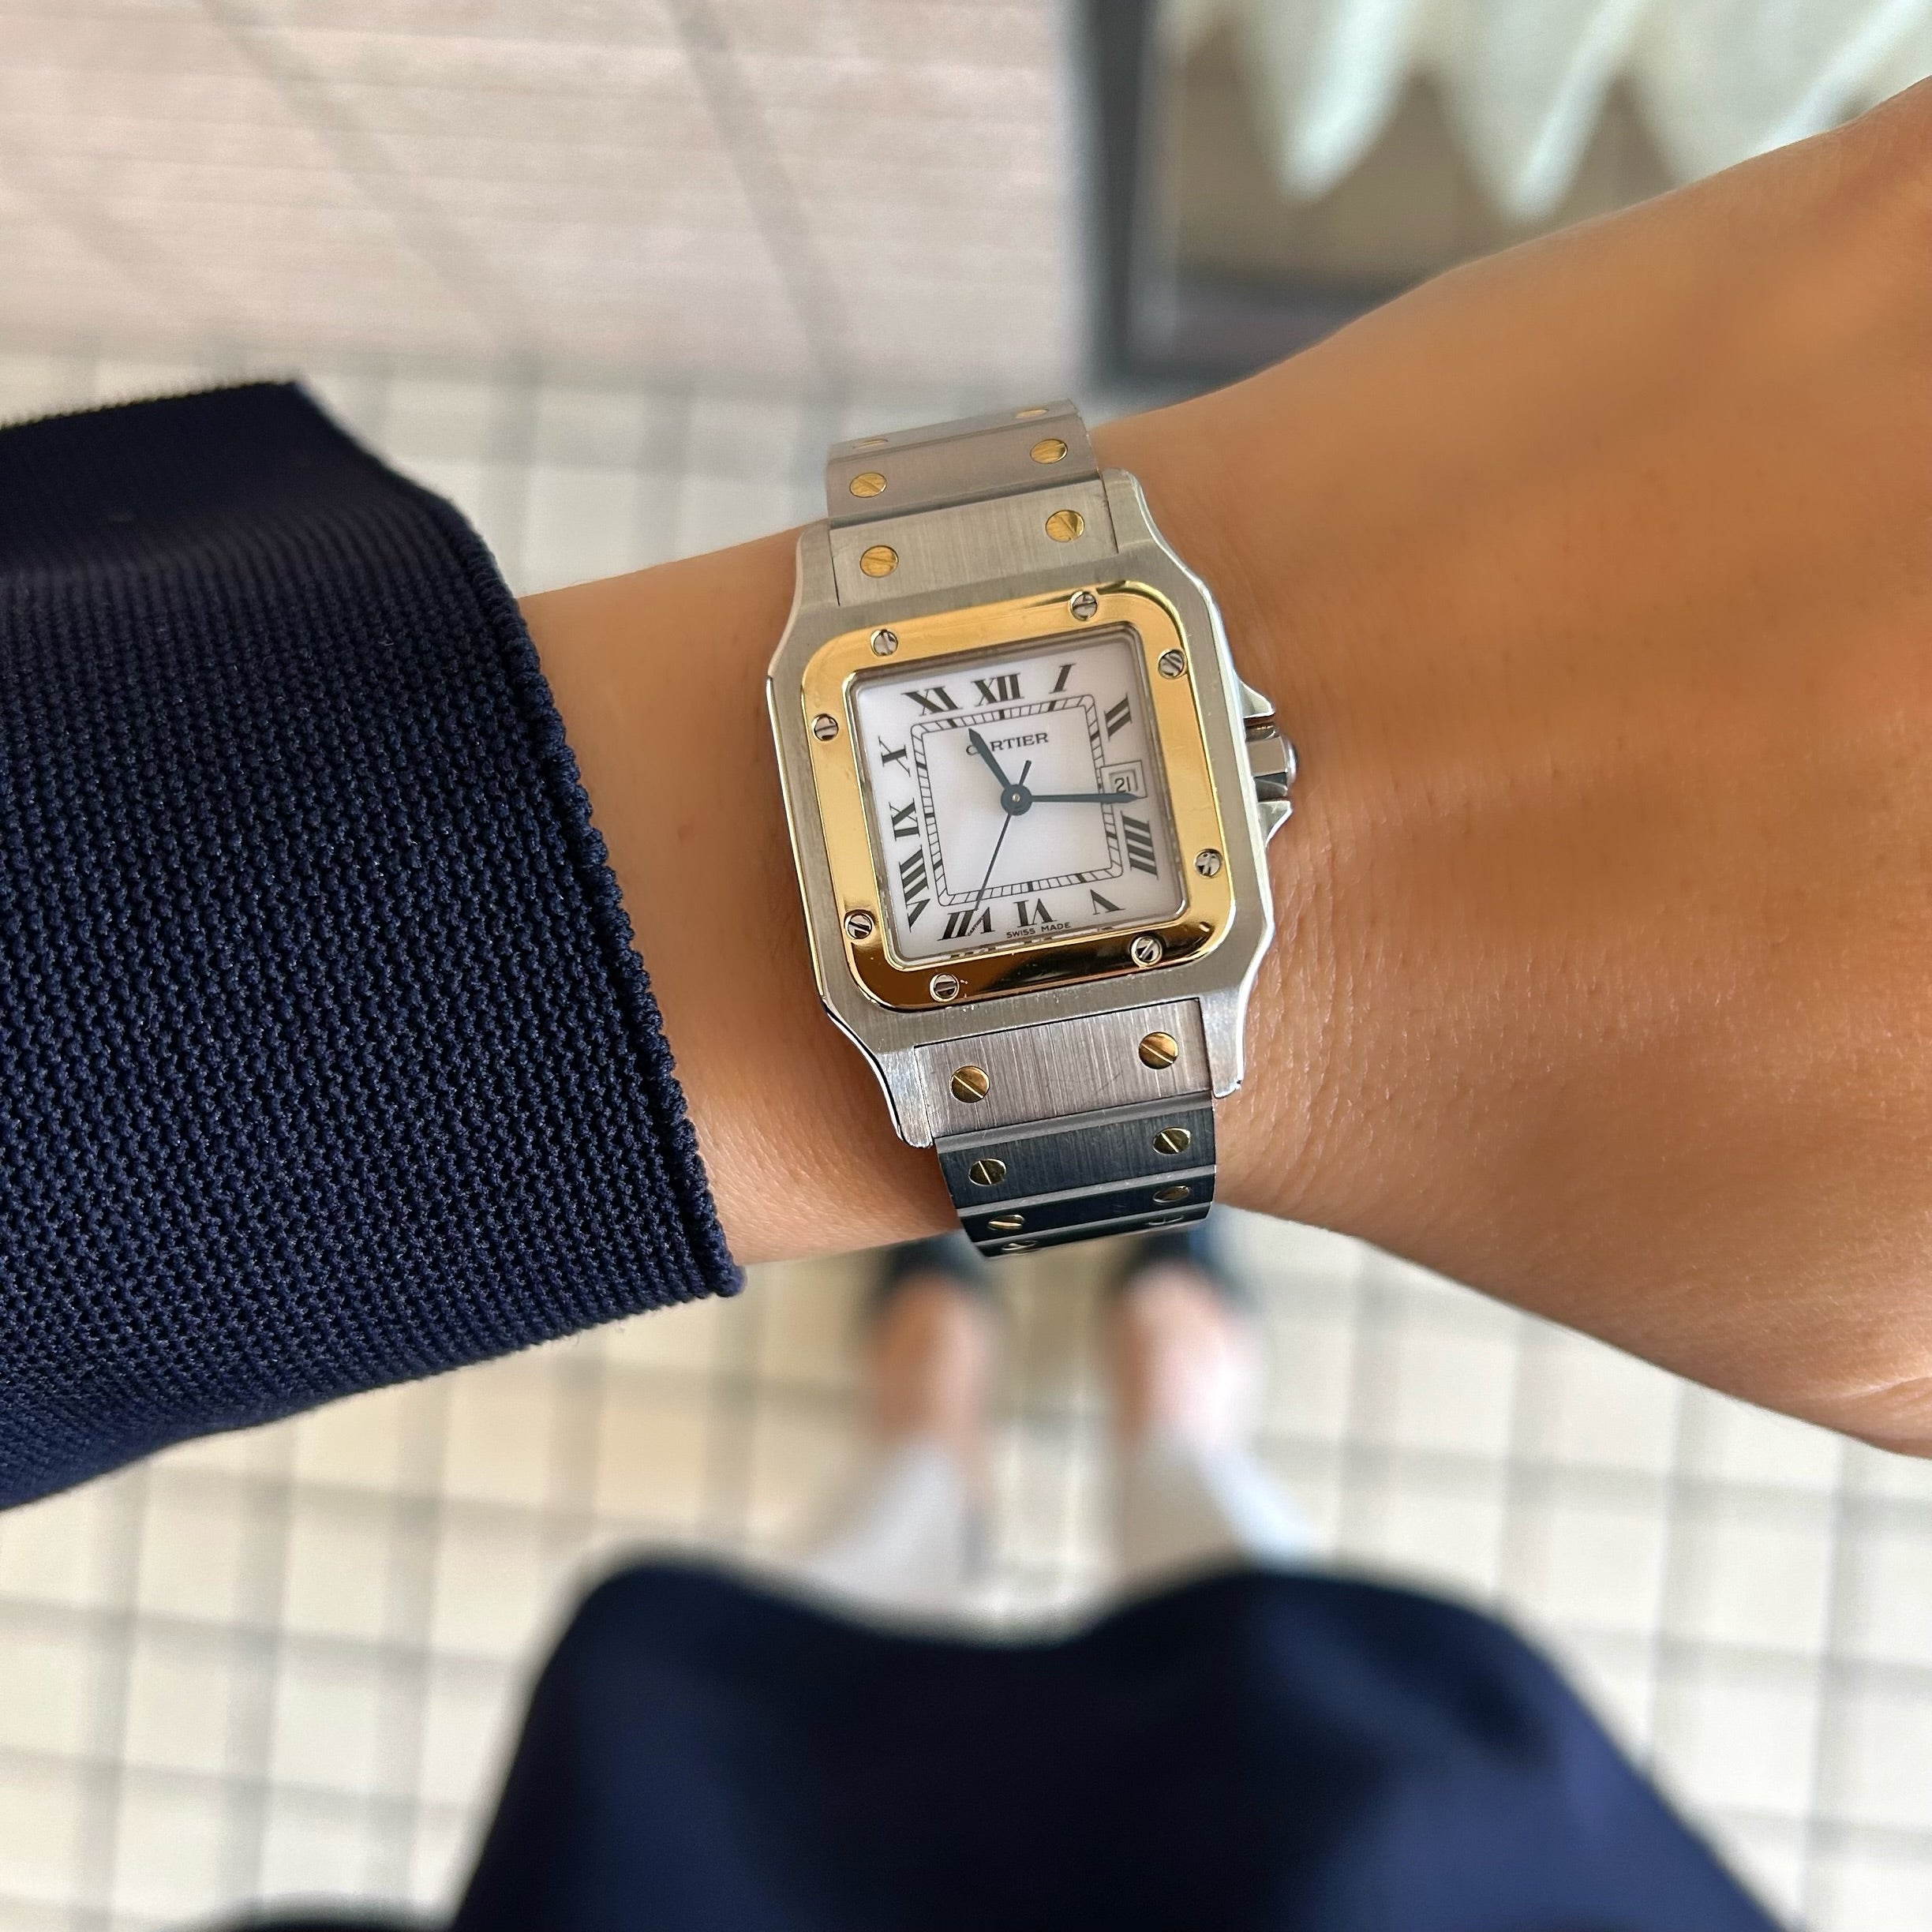 Cartier】サントスガルベLMコンビ 純正ボックス付き – REGALO vintage 